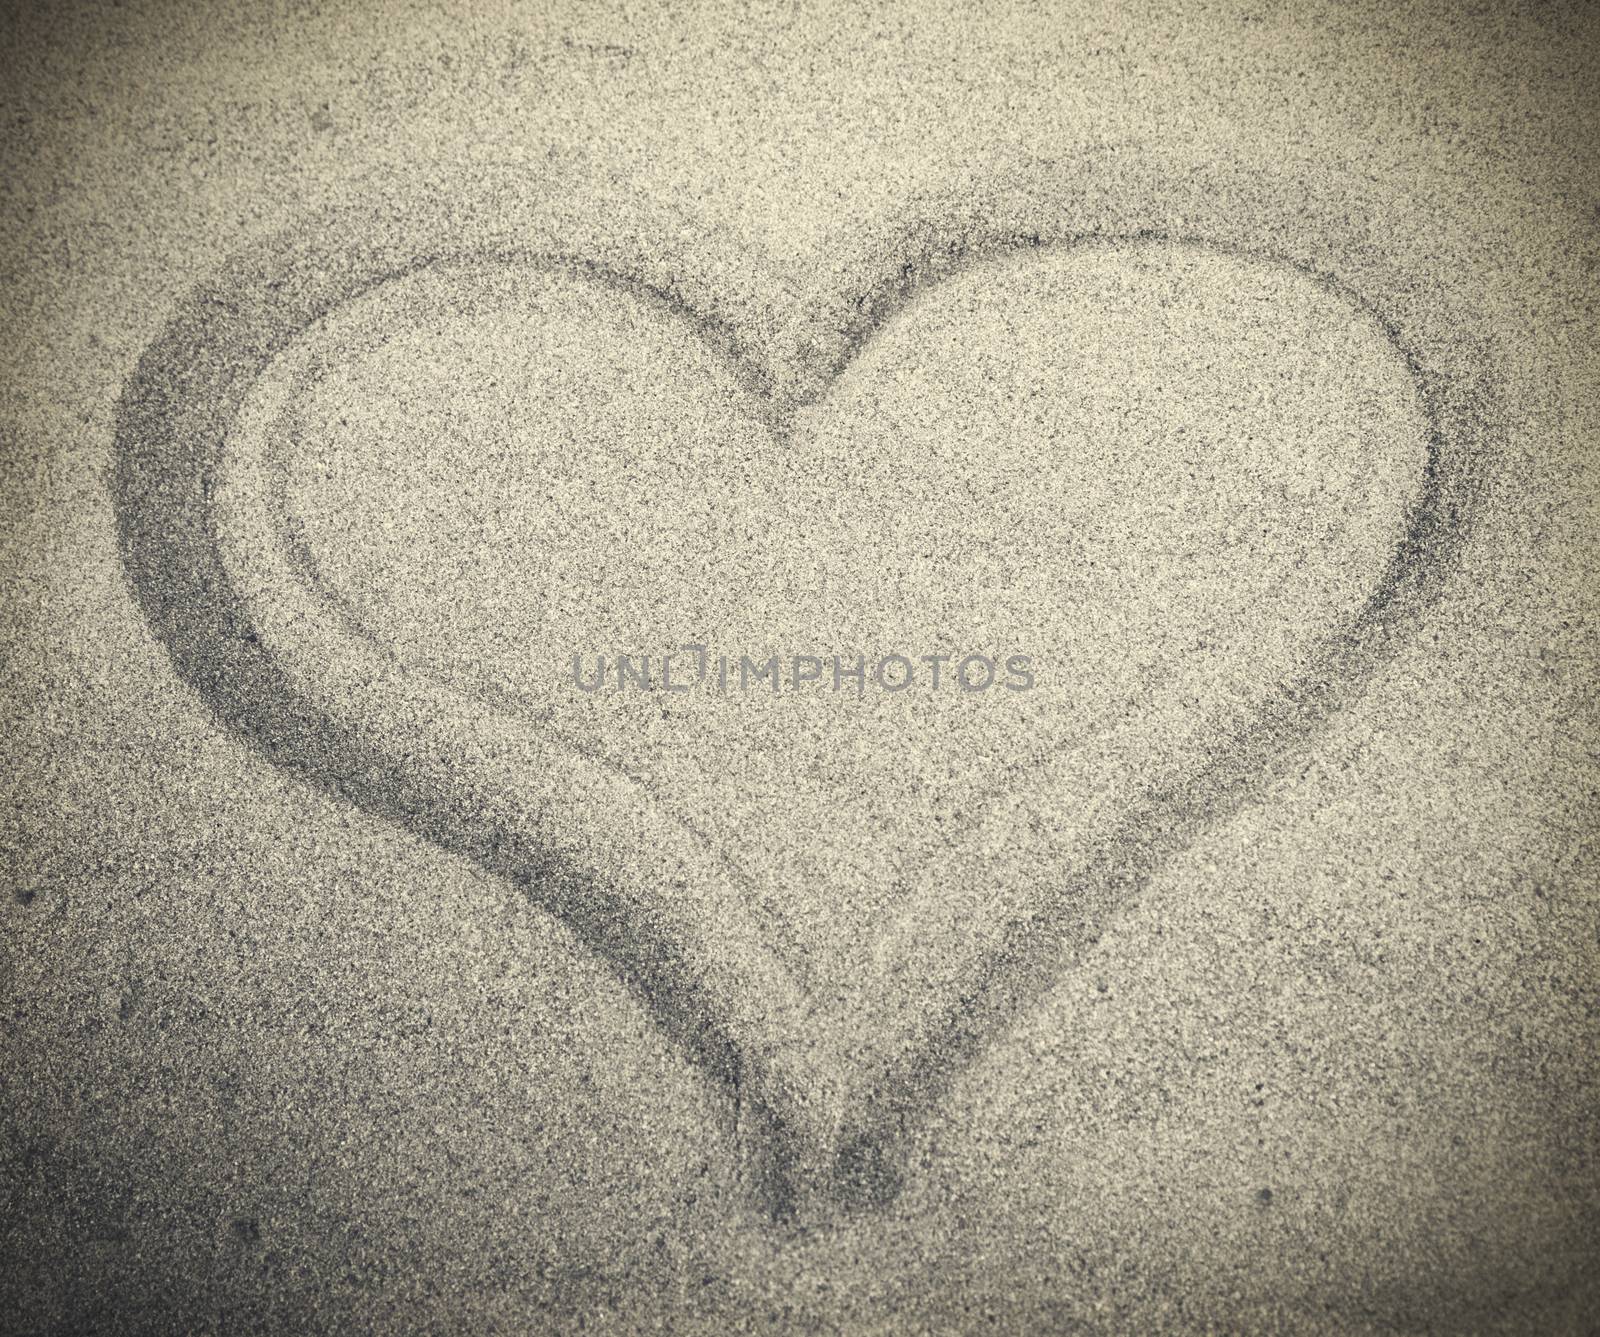 Picture of heart drew on white sand